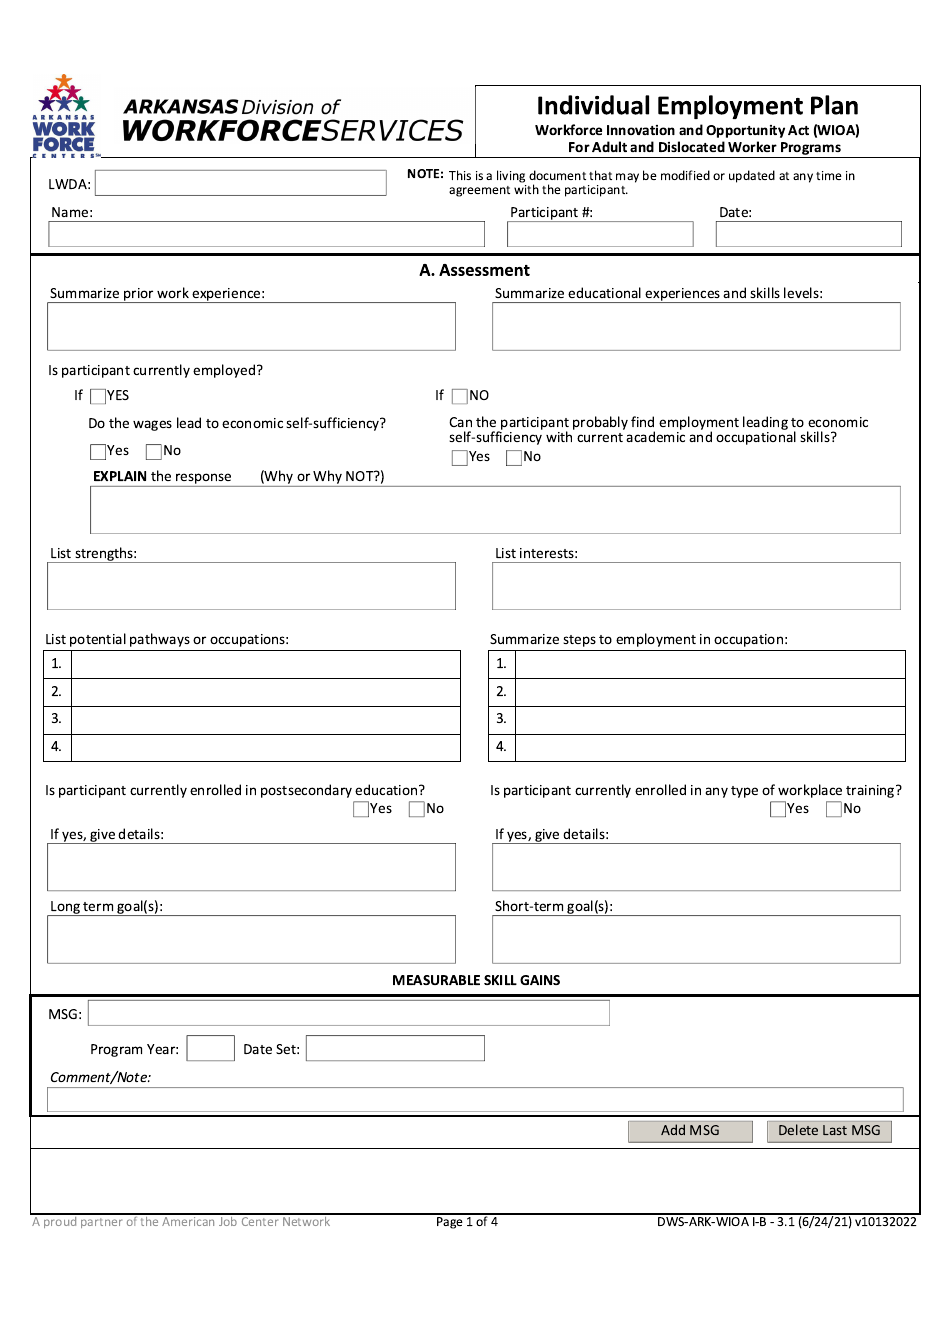 Form DWS-ARK-WIOA I-B3.1 Individual Employment Plan for Adult and Dislocated Worker Programs - Arkansas, Page 1